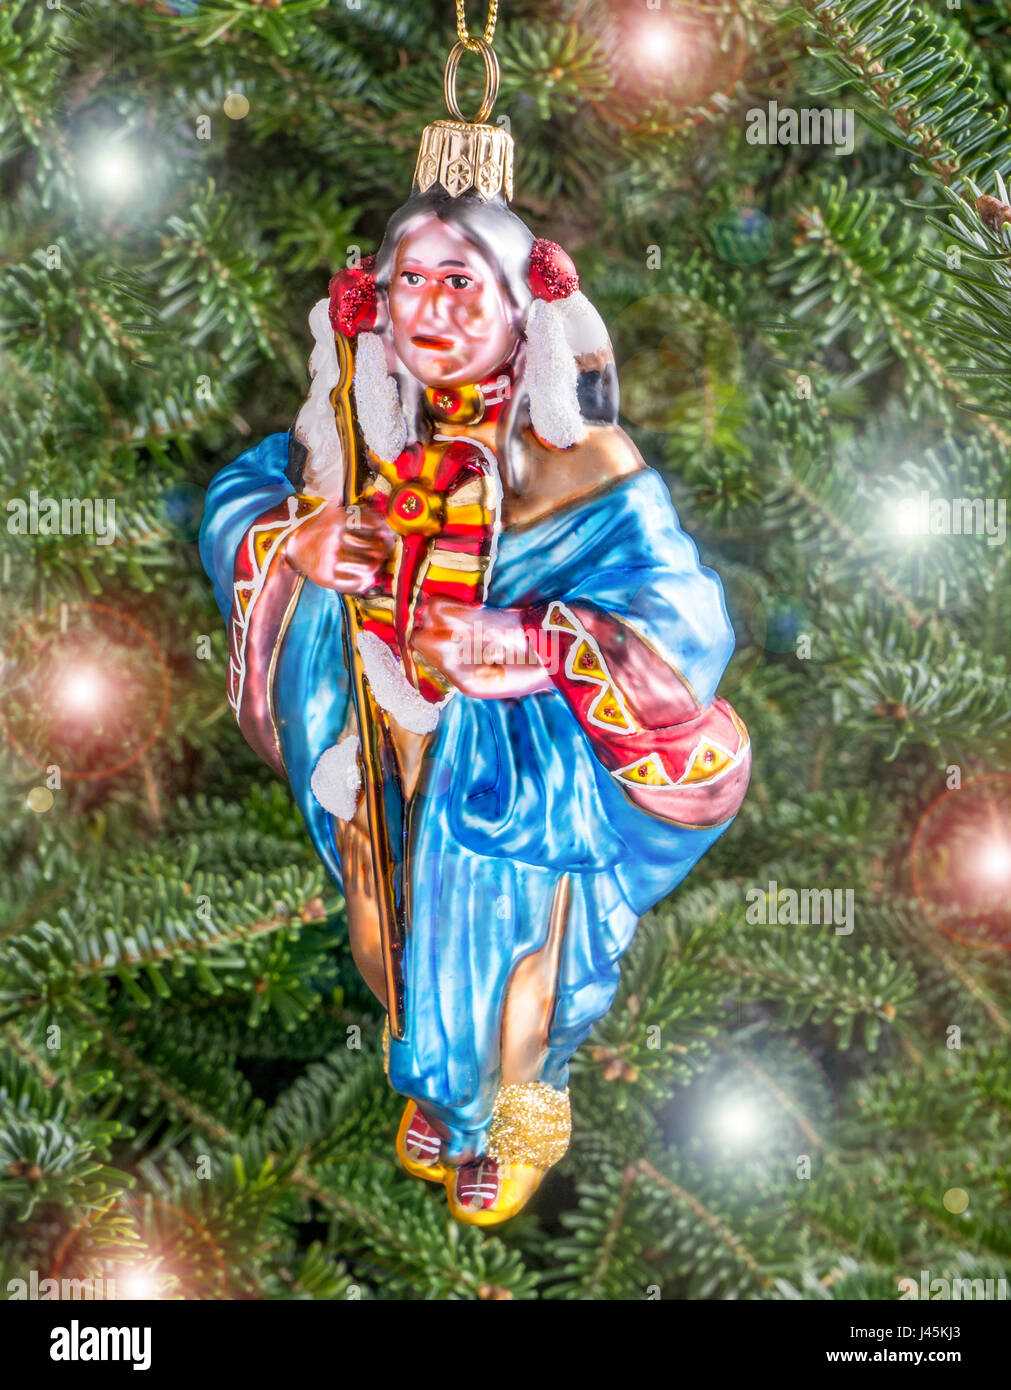 Christmas bauble hanging from a tree in the shape of a Indian Squaw Stock Photo